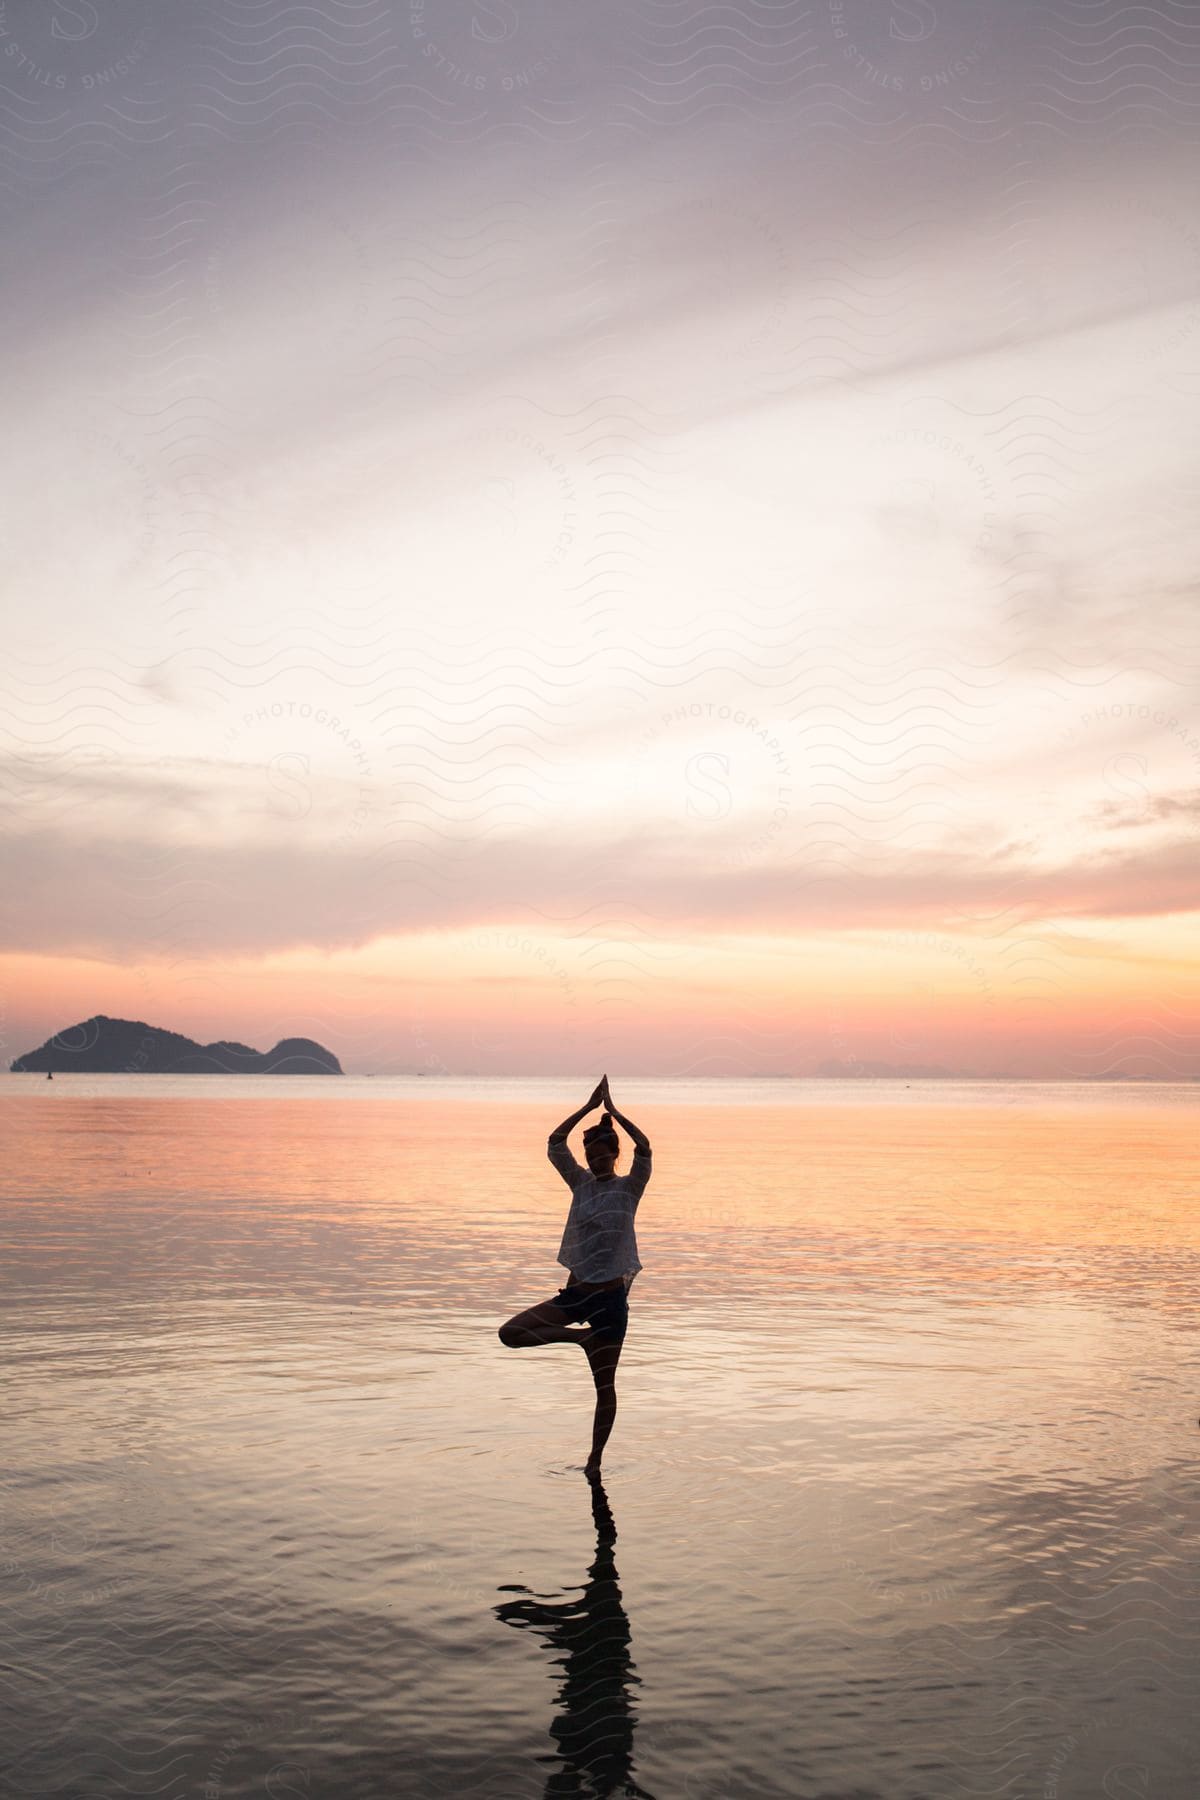 A woman doing yoga in the ocean at the edge of the water